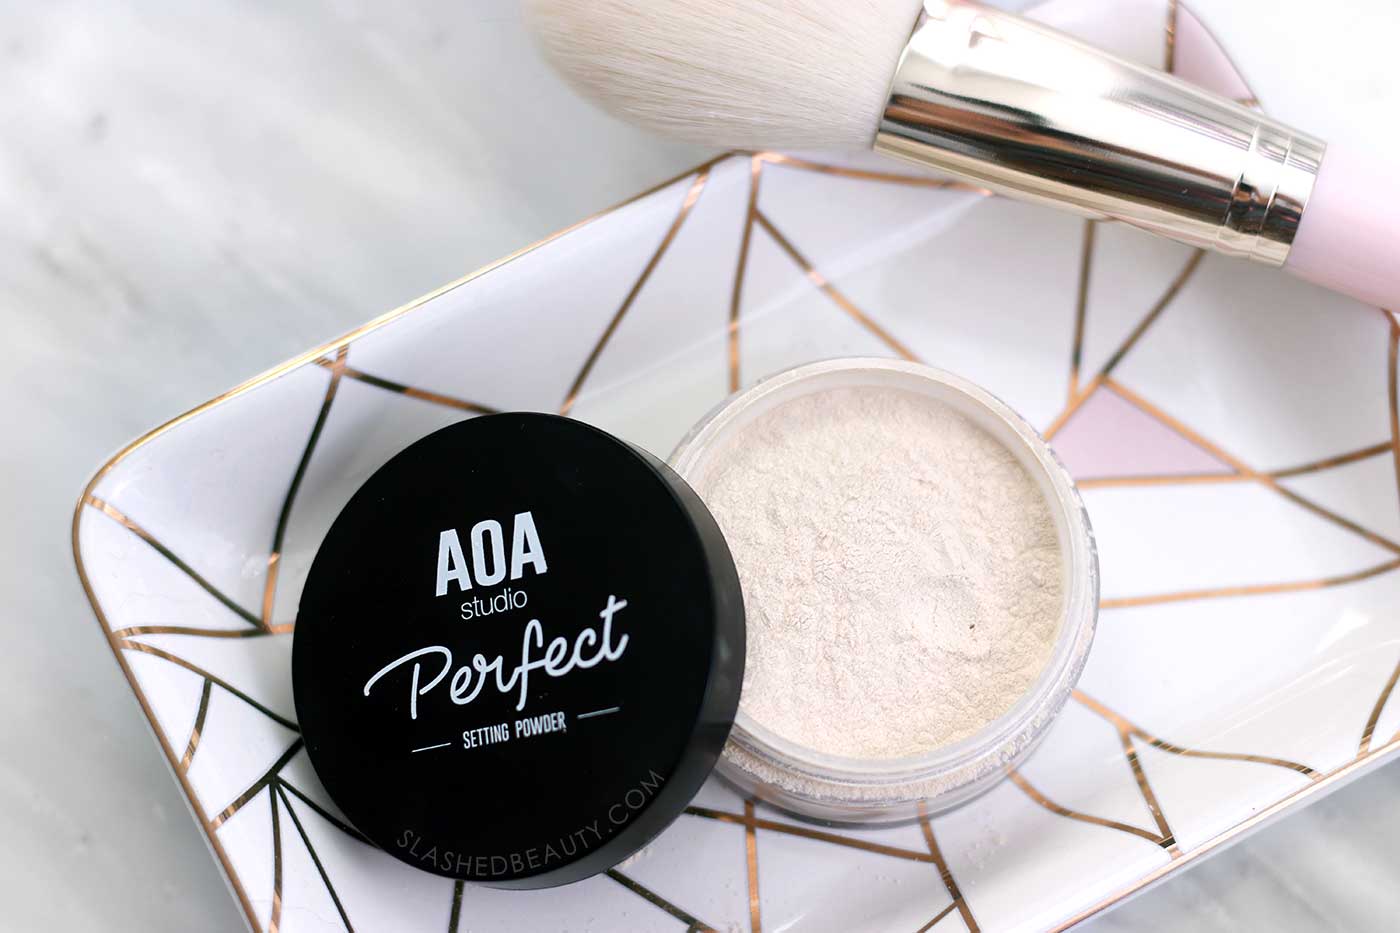 AOA Perfect Setting Powder Review | Best Powder for Baking on a Budget | Affordable Makeup Setting Powder | Slashed Beauty